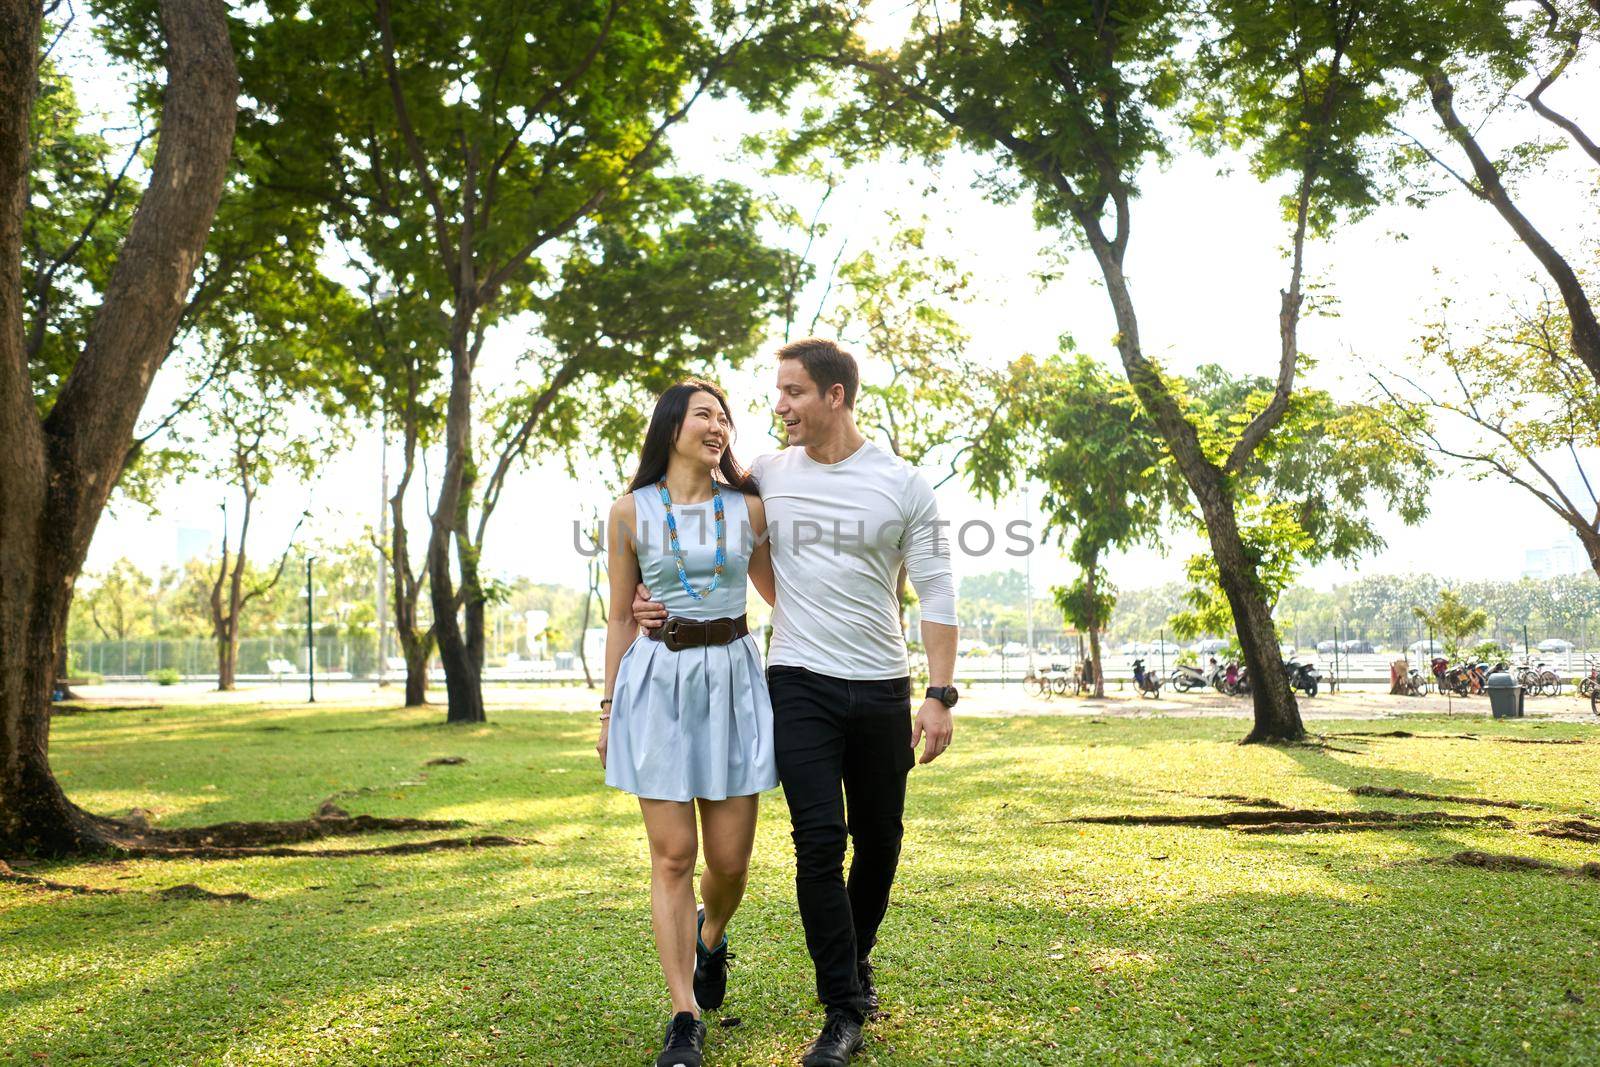 Multiethnic marriage walking while embracing looking each other in a park surrounded by trees